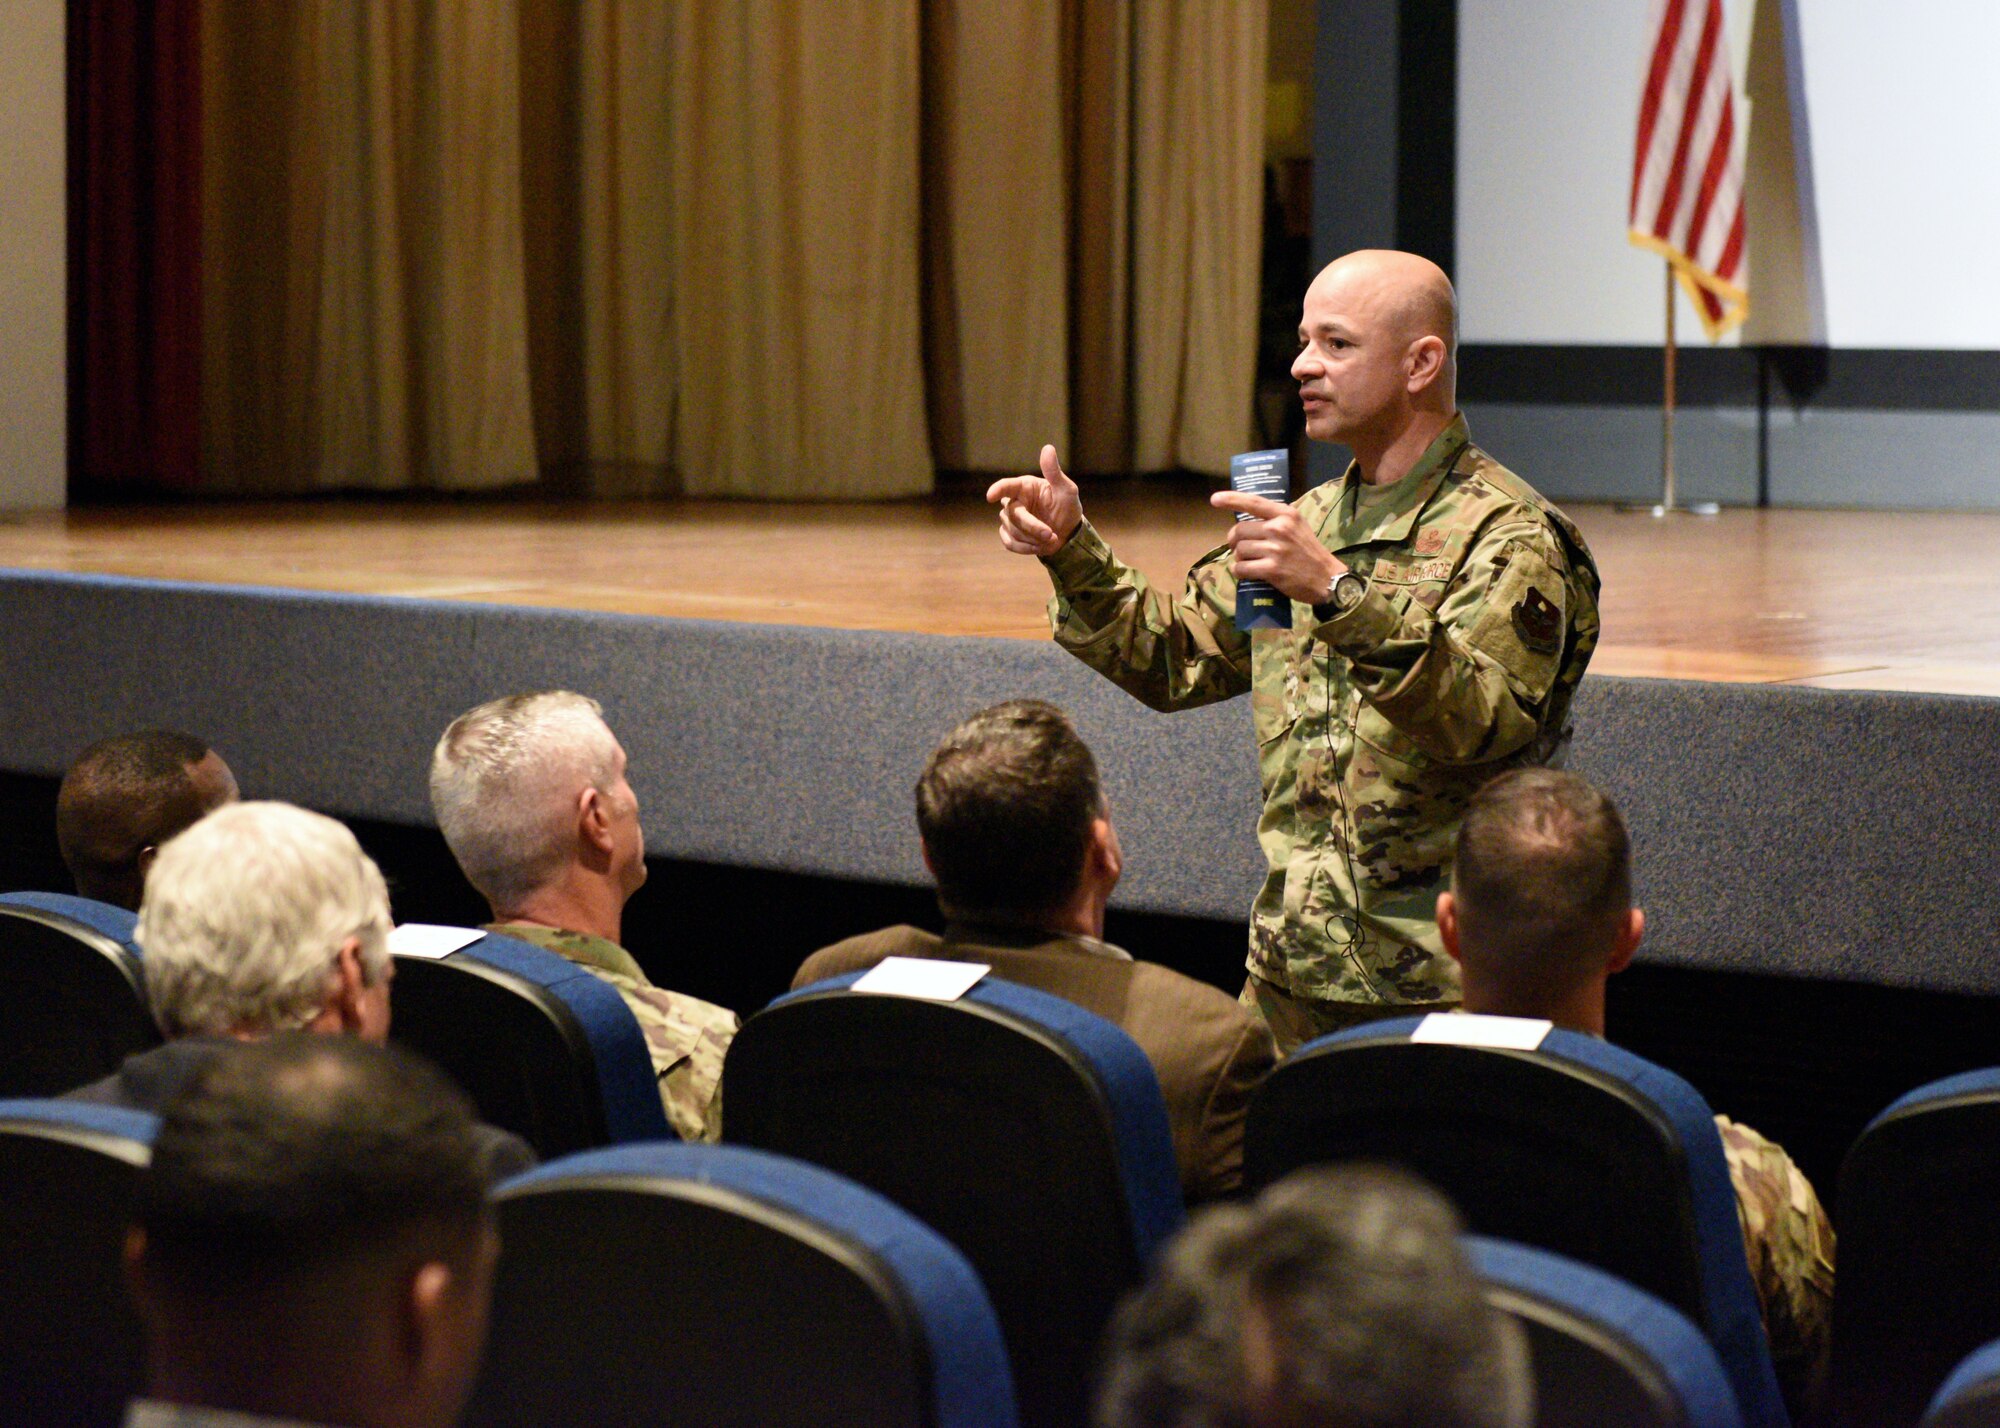 U.S. Air Force Col. Andres Nazario, 17th Training Wing commander, speaks to members of the Goodfellow team about ways he hopes to improve the base environment during a commander’s call at the base theater on Goodfellow Air Force Base, Texas, July 25, 2019. Nazario challenged the attendees to be leaders and revolutionaries in their respective career fields. (U.S. Air Force photo by Airman 1st Class Robyn Hunsinger/Released)